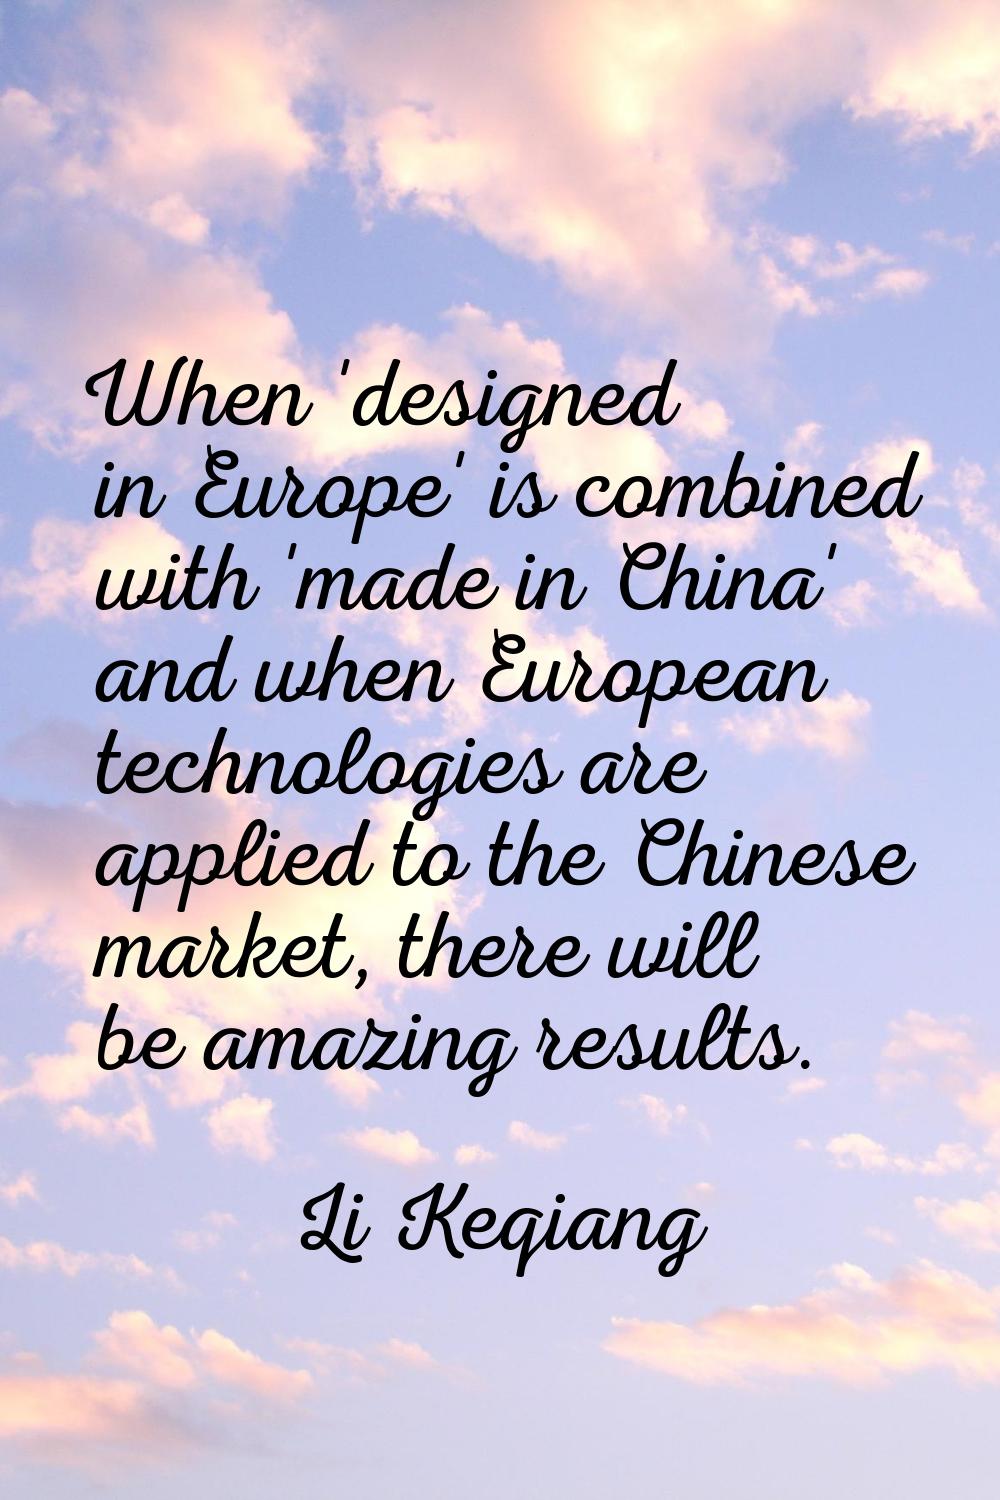 When 'designed in Europe' is combined with 'made in China' and when European technologies are appli